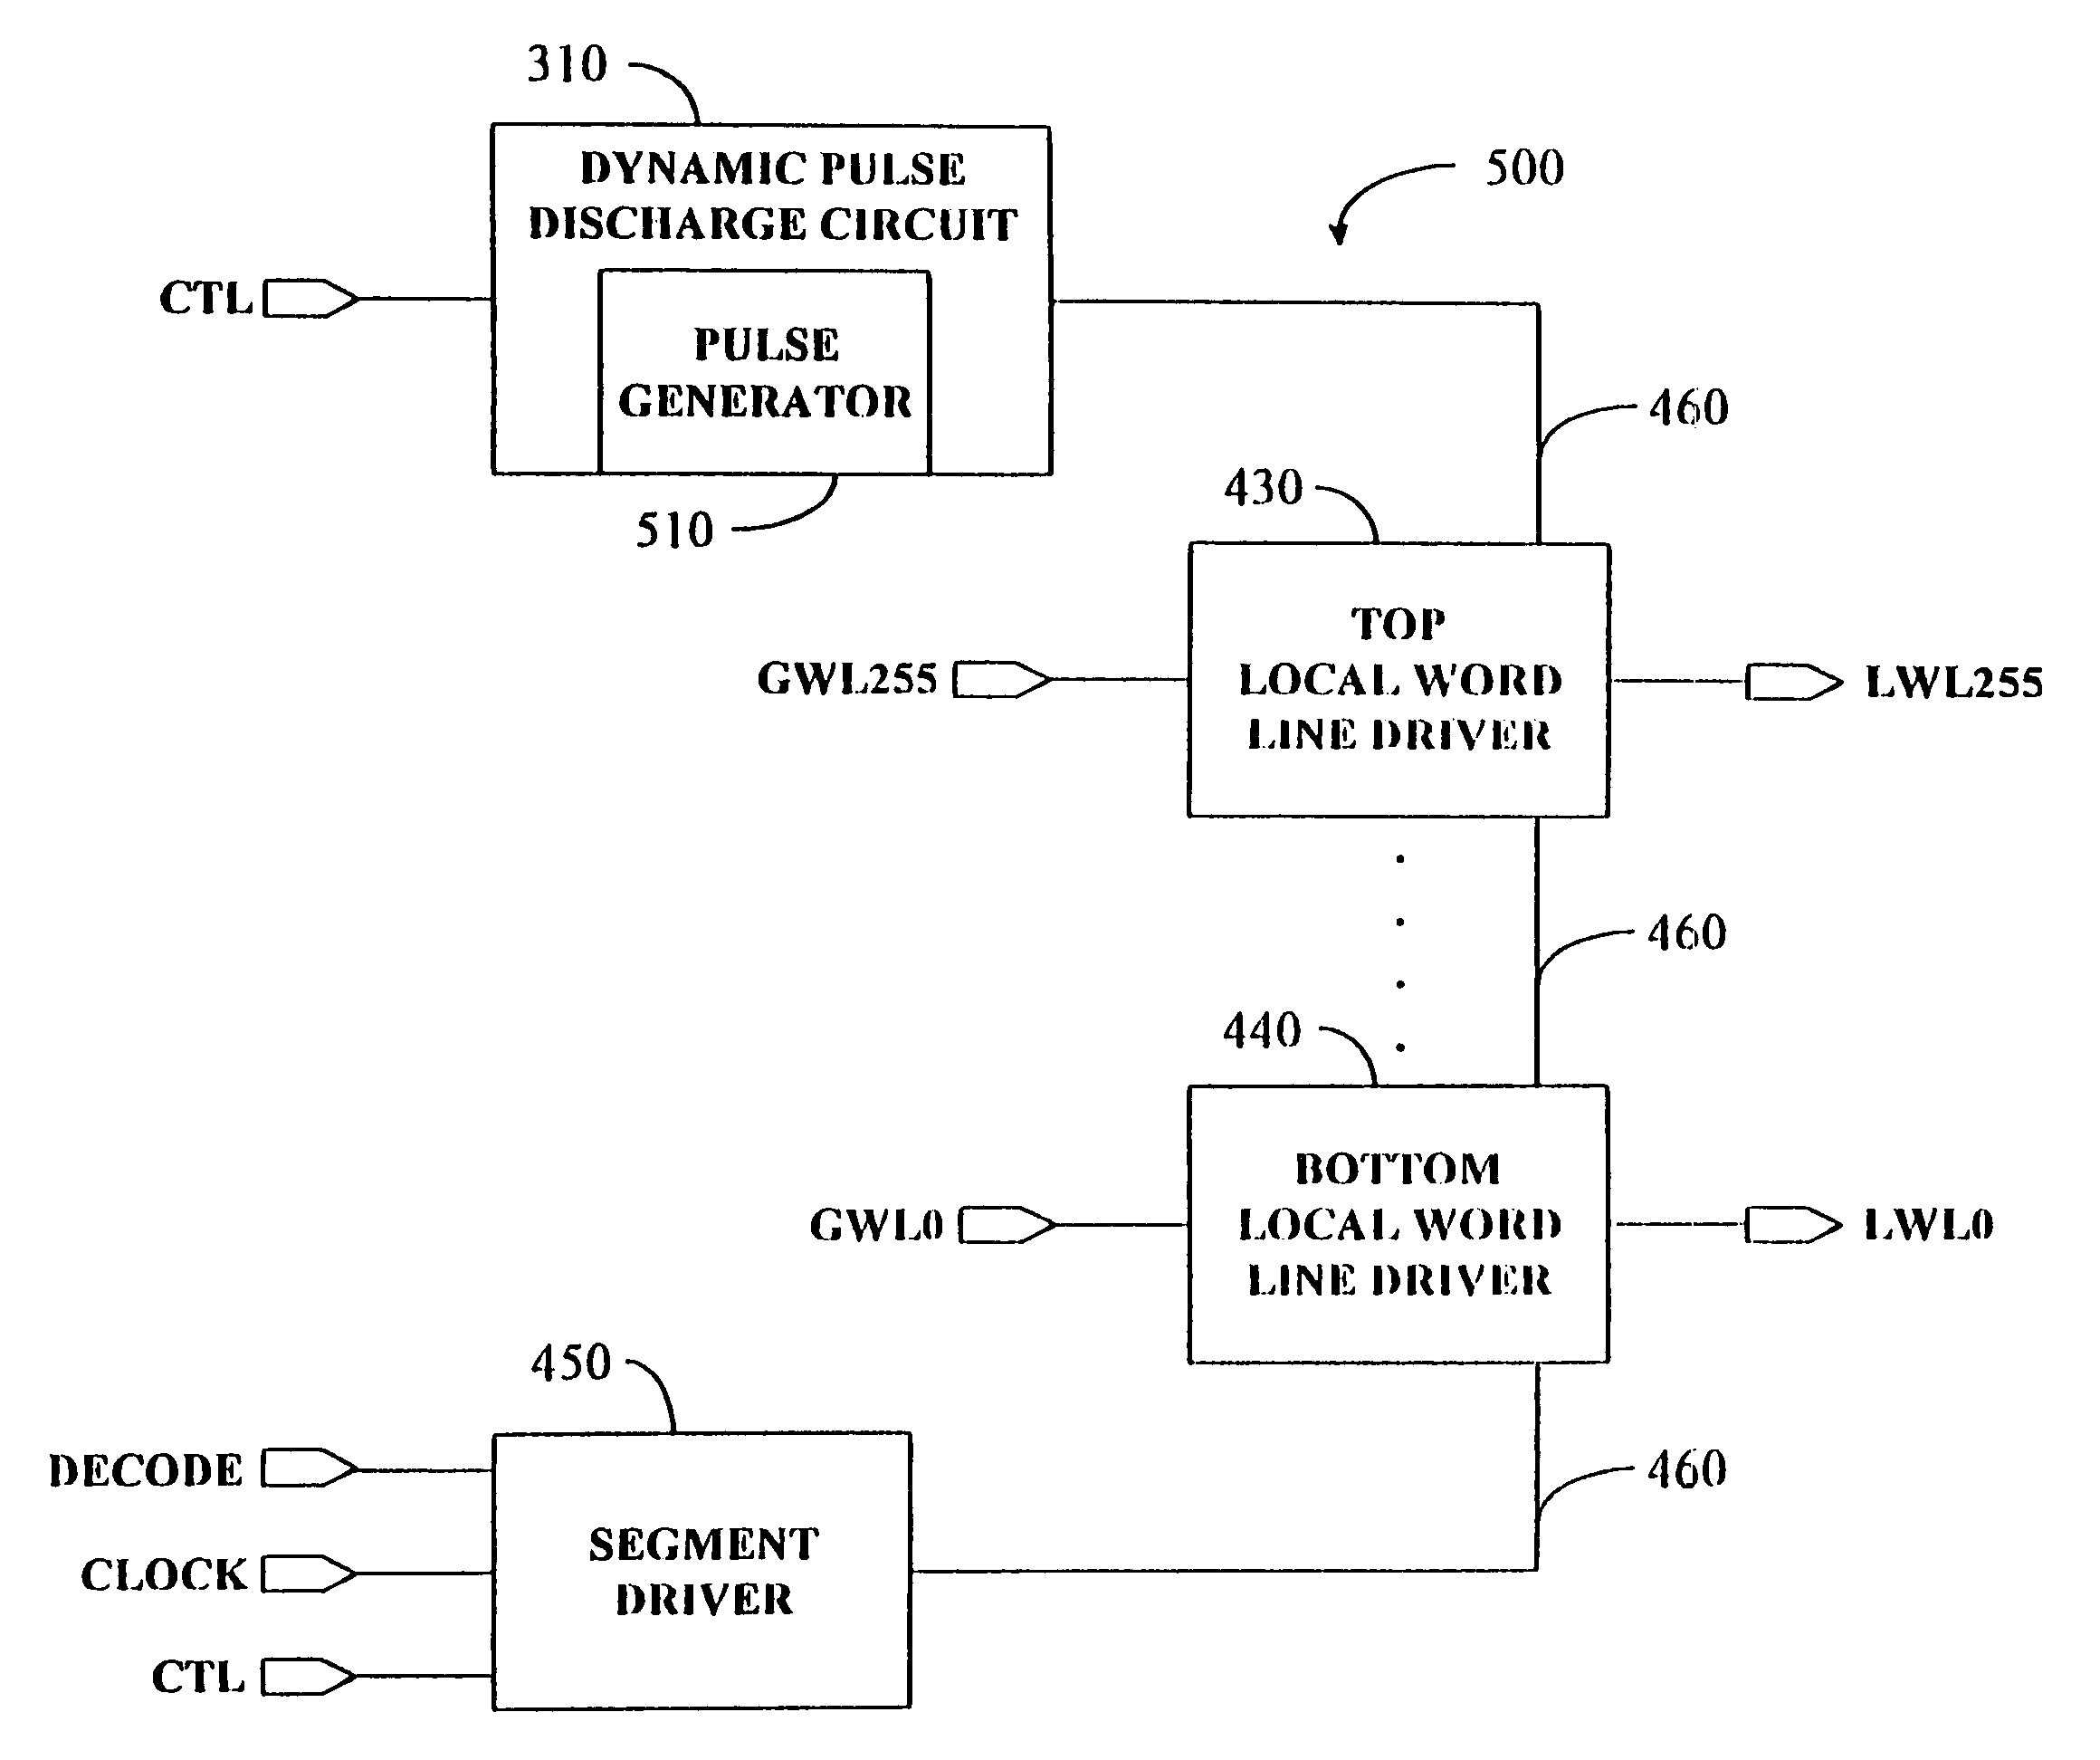 Methods to improve the operation of SOI devices